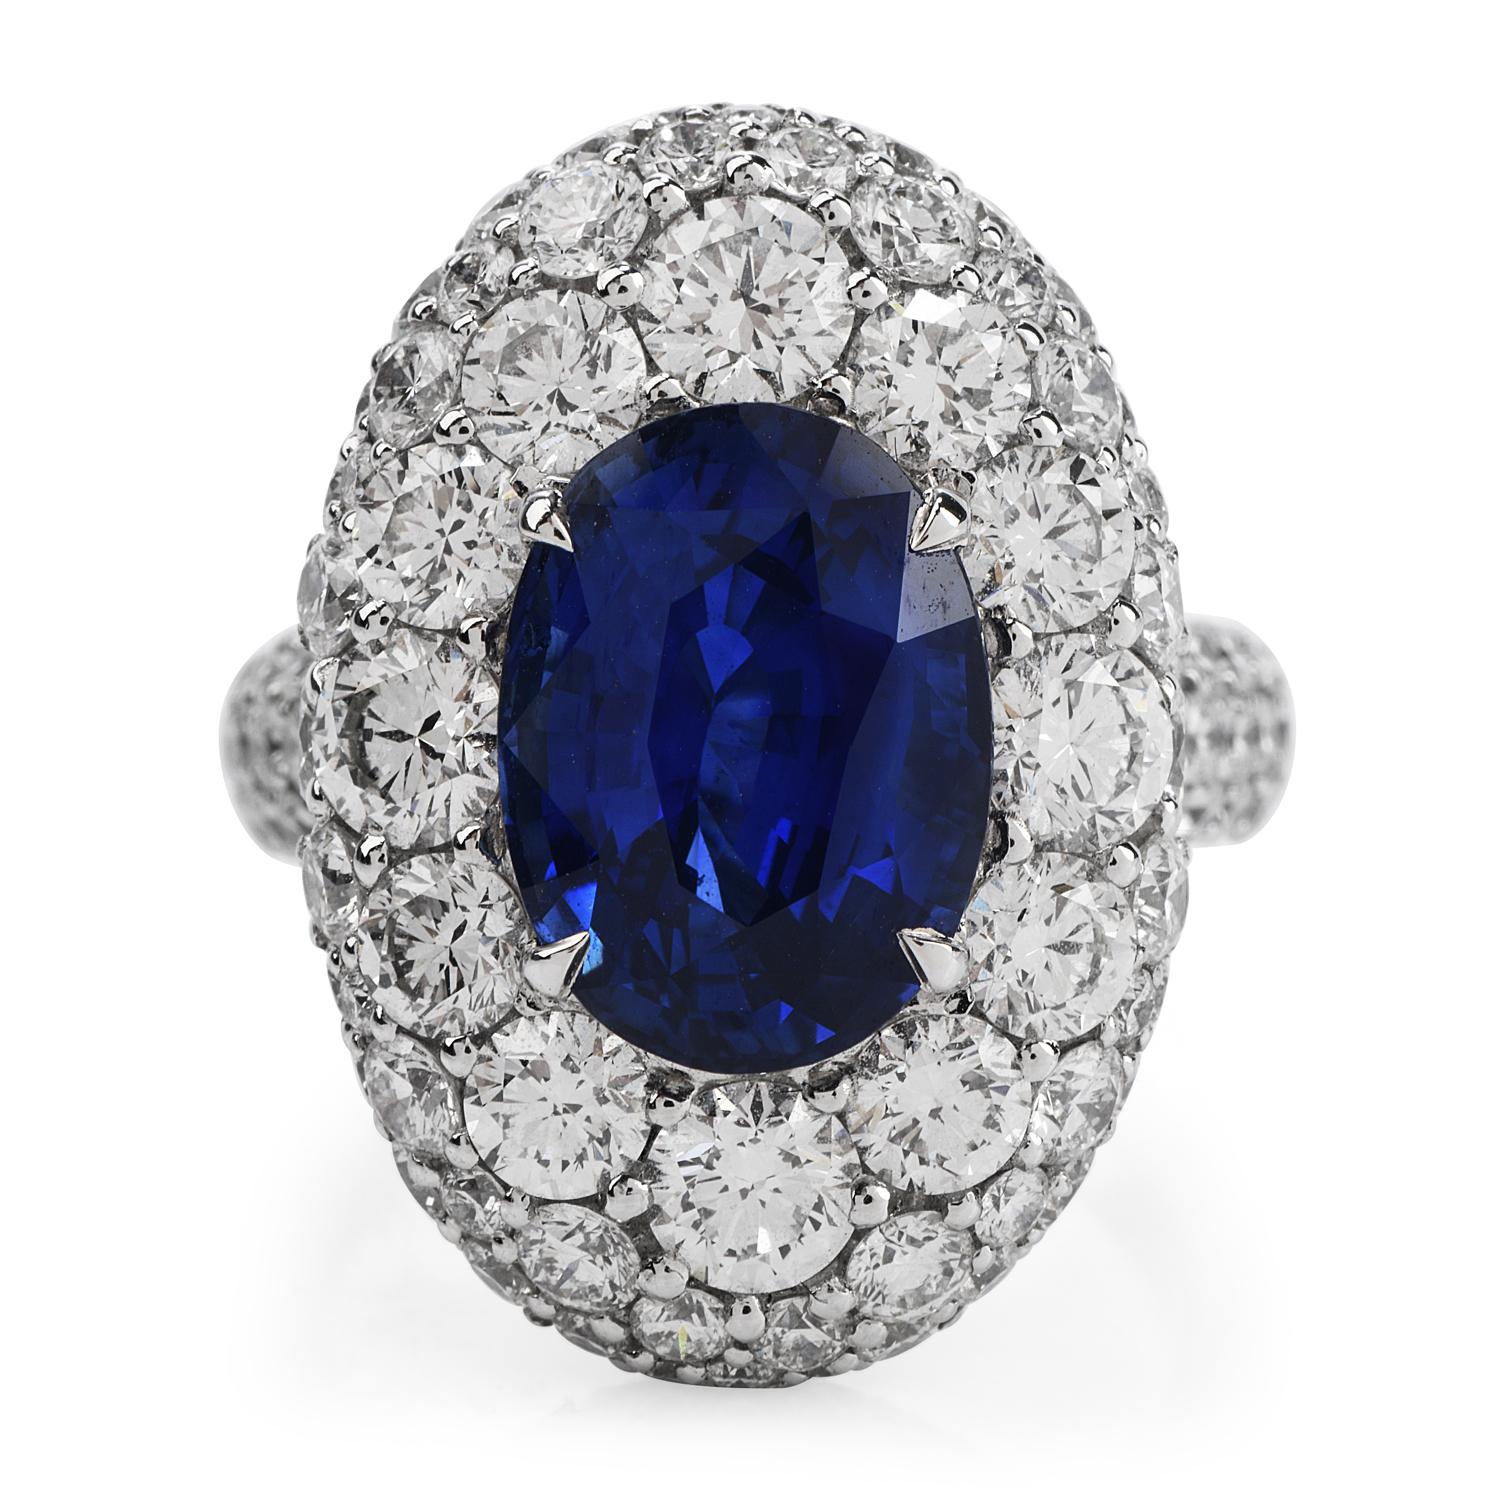 This pristine condition Diamond and Sapphire cocktail ring is and crafted in 18k white gold.

Prominently showcased a Ceylon (Sri Lanka) Blue sapphire All Natural Royal Blue color, accomponied With  GRS Lab report indicating this Gem  natural